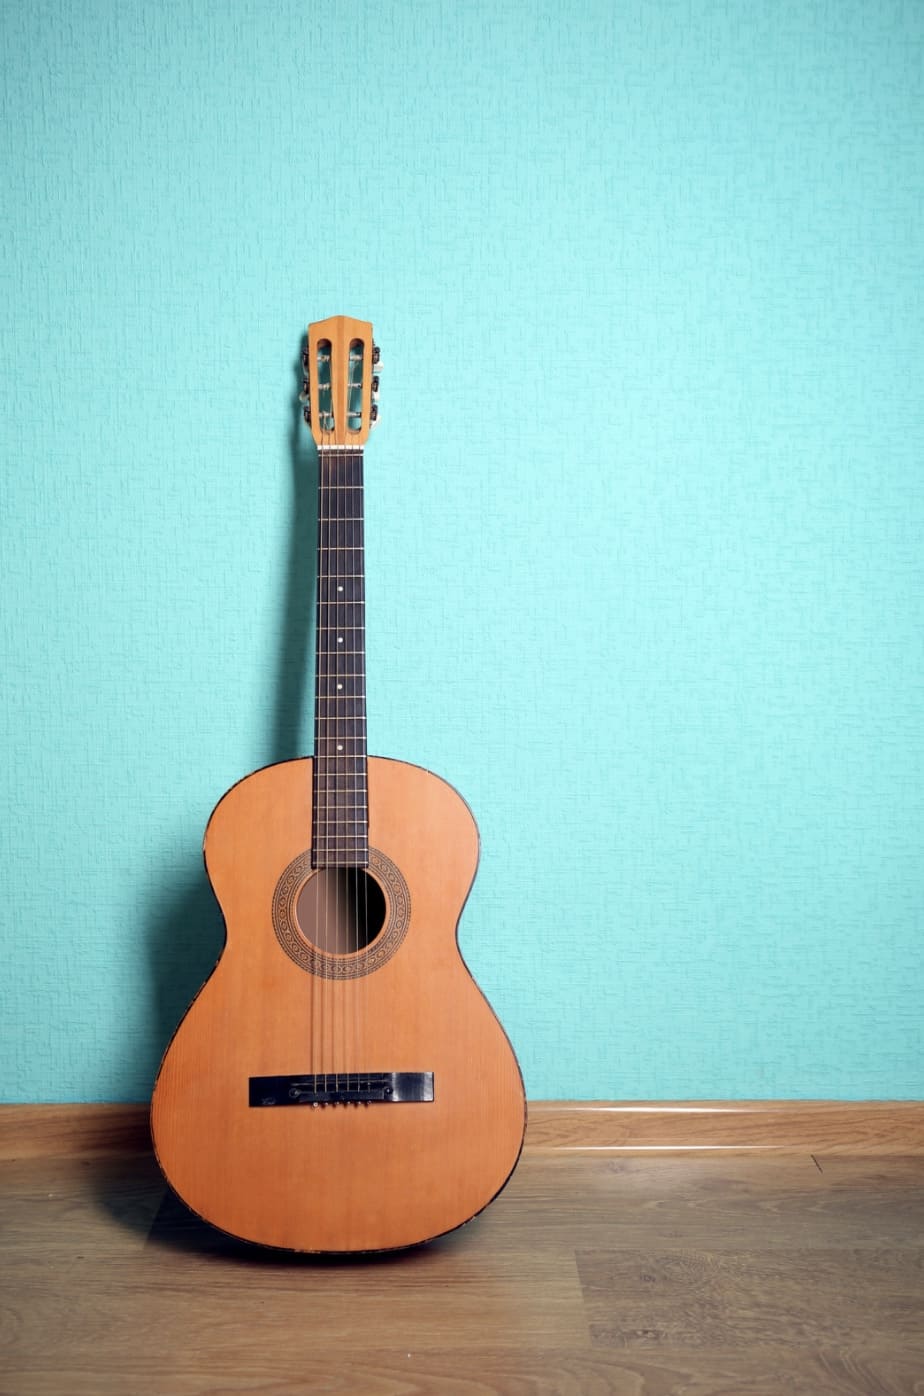 Guitar on Wall